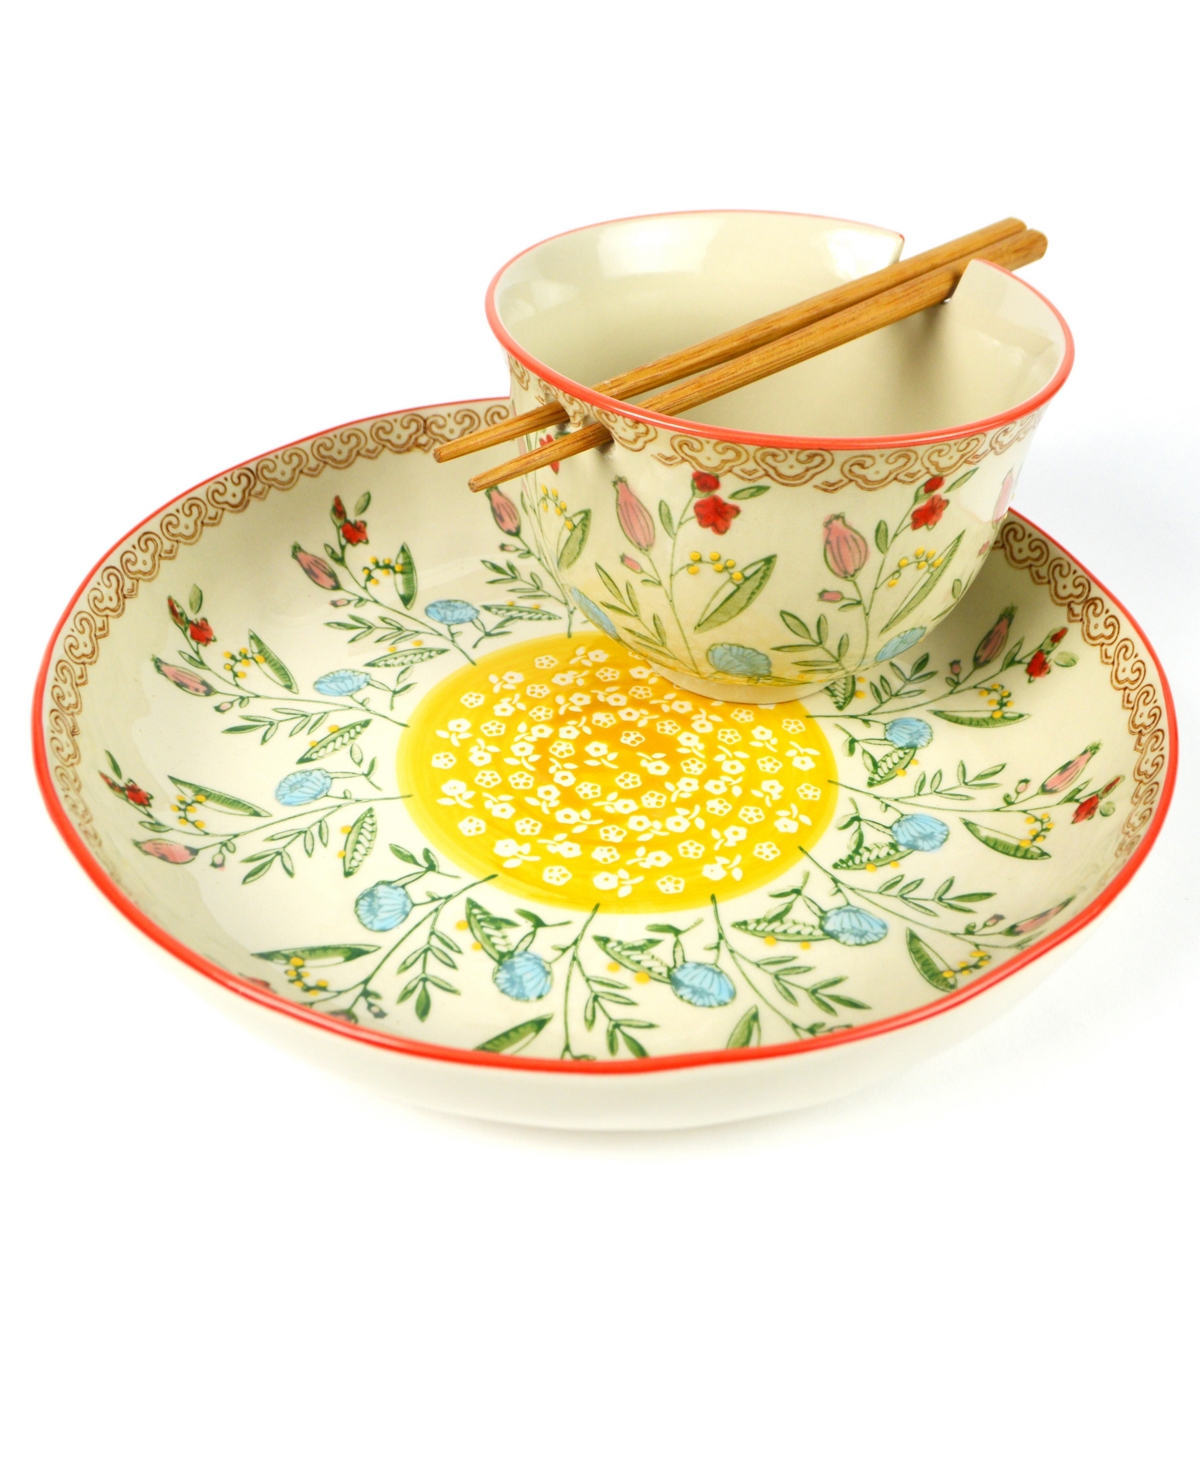 Ella Ramen Bowl and Dinner Bowl Set in Red - Red